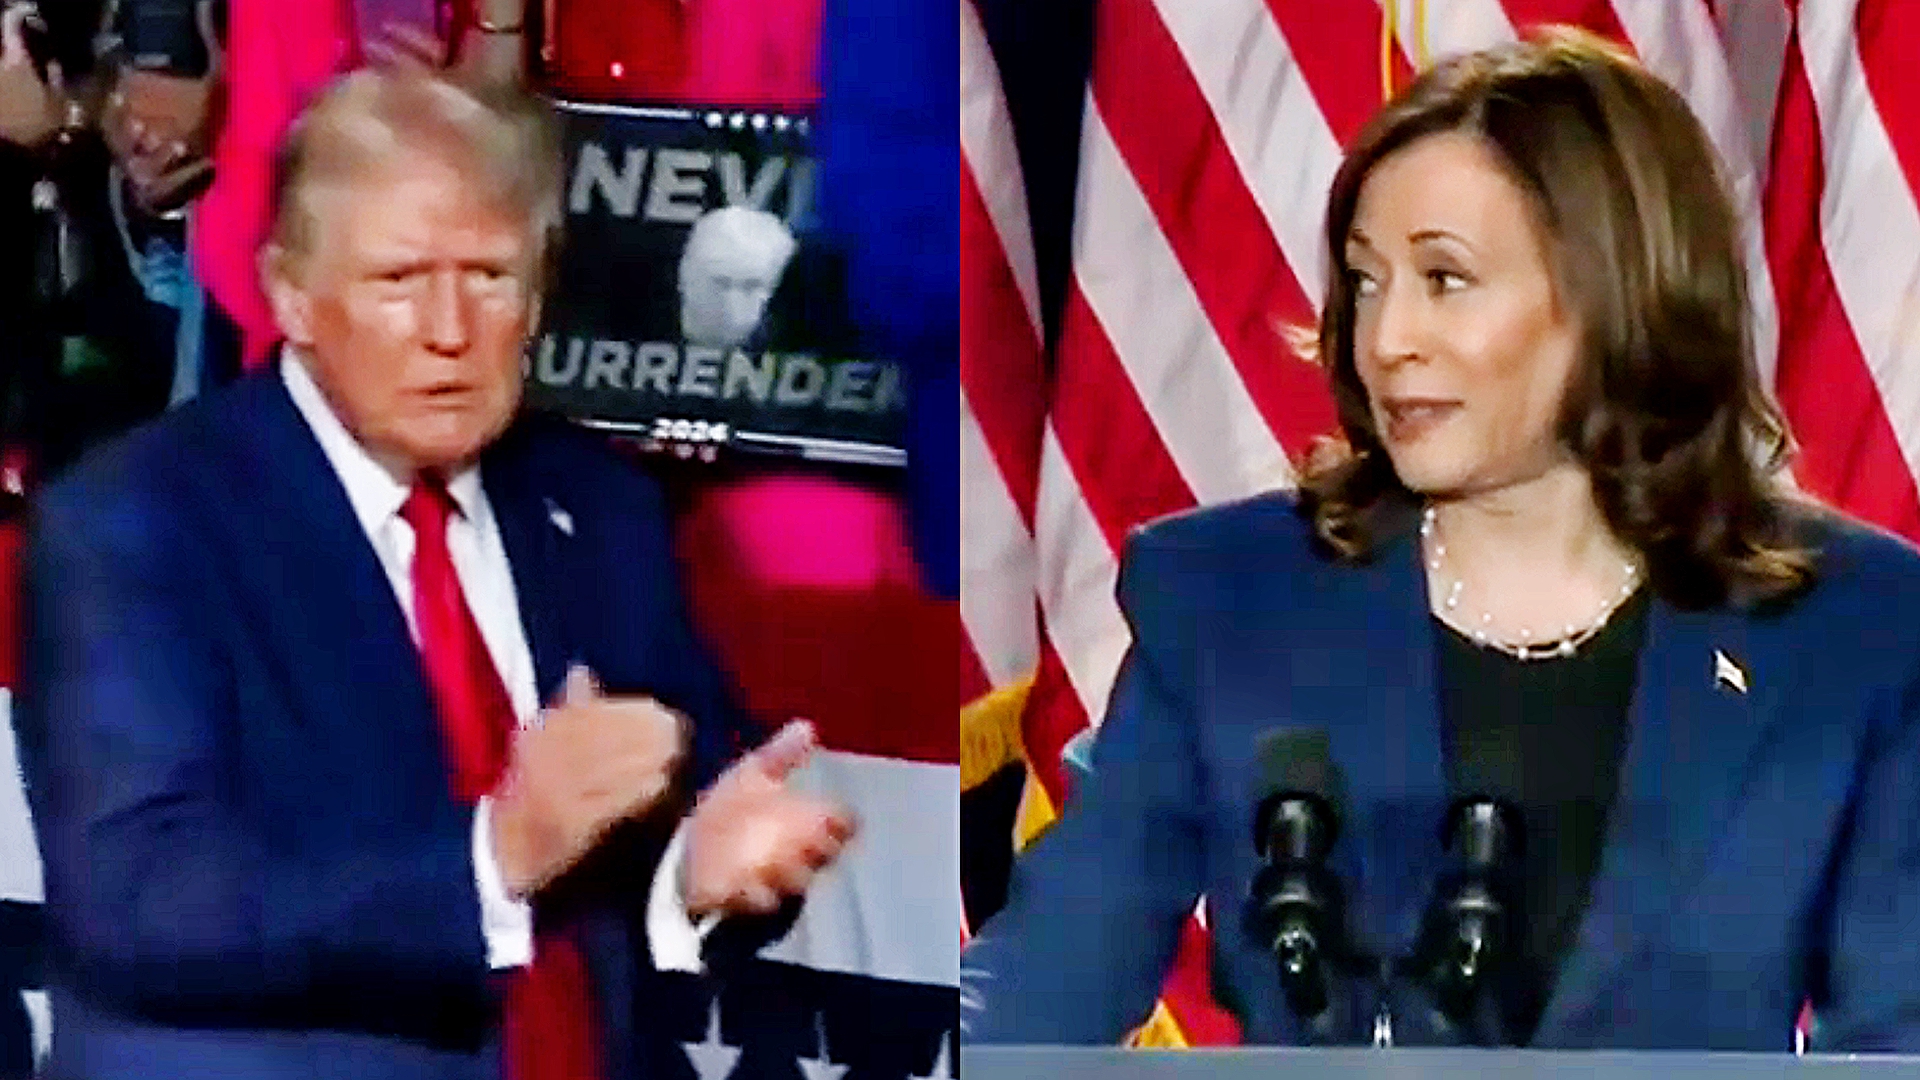 Kamala Harris Campaign Takes Aim at Trump’s Age in Response to Fox News Interview: ’78-Year-Old Criminal’